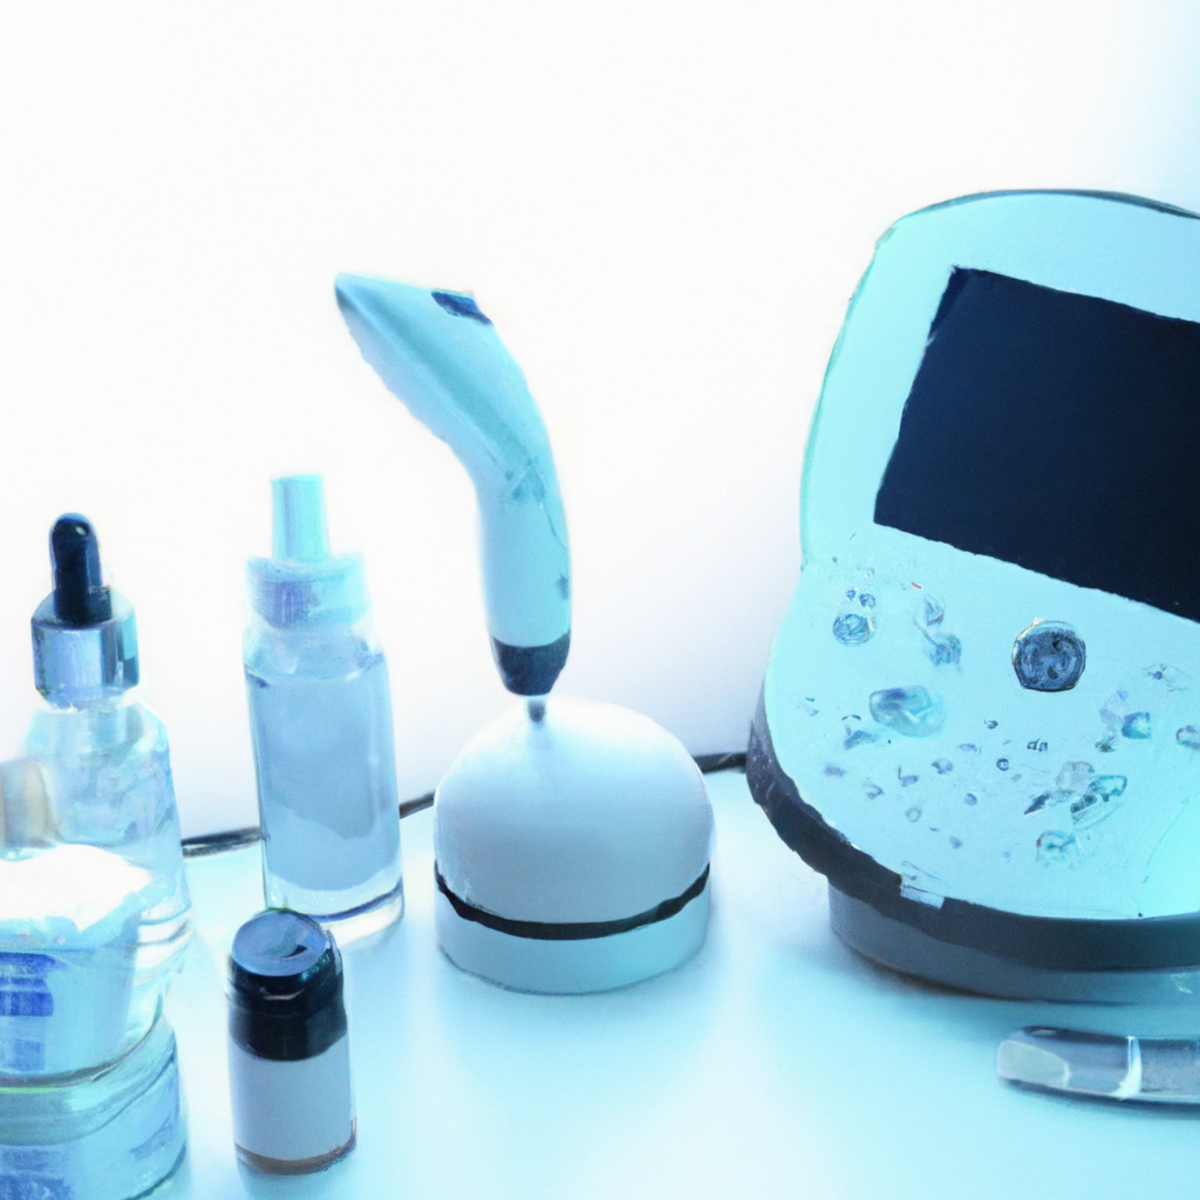 Close-up view of a table with a sleek laser device emitting blue light, surrounded by skincare products and research papers -Rosacea management